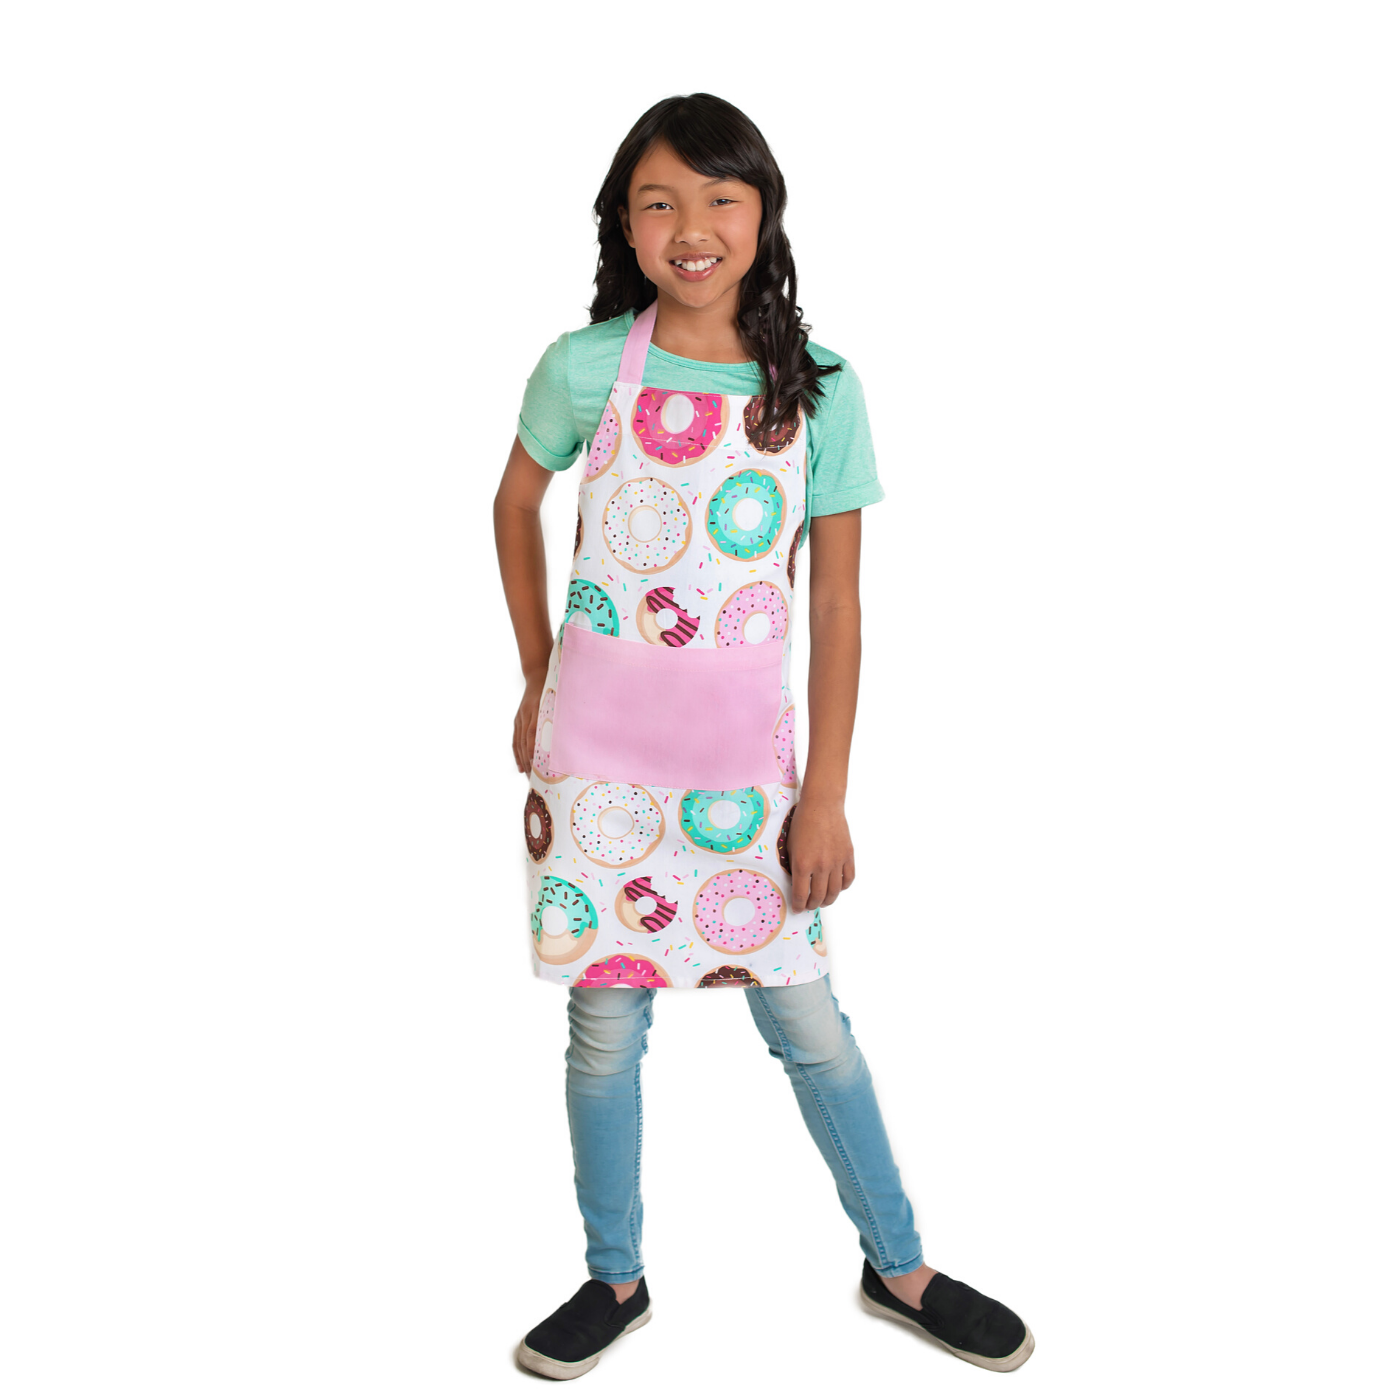 Child wearing child sized apron from Donut Print Adult and Child Apron Cooking Set